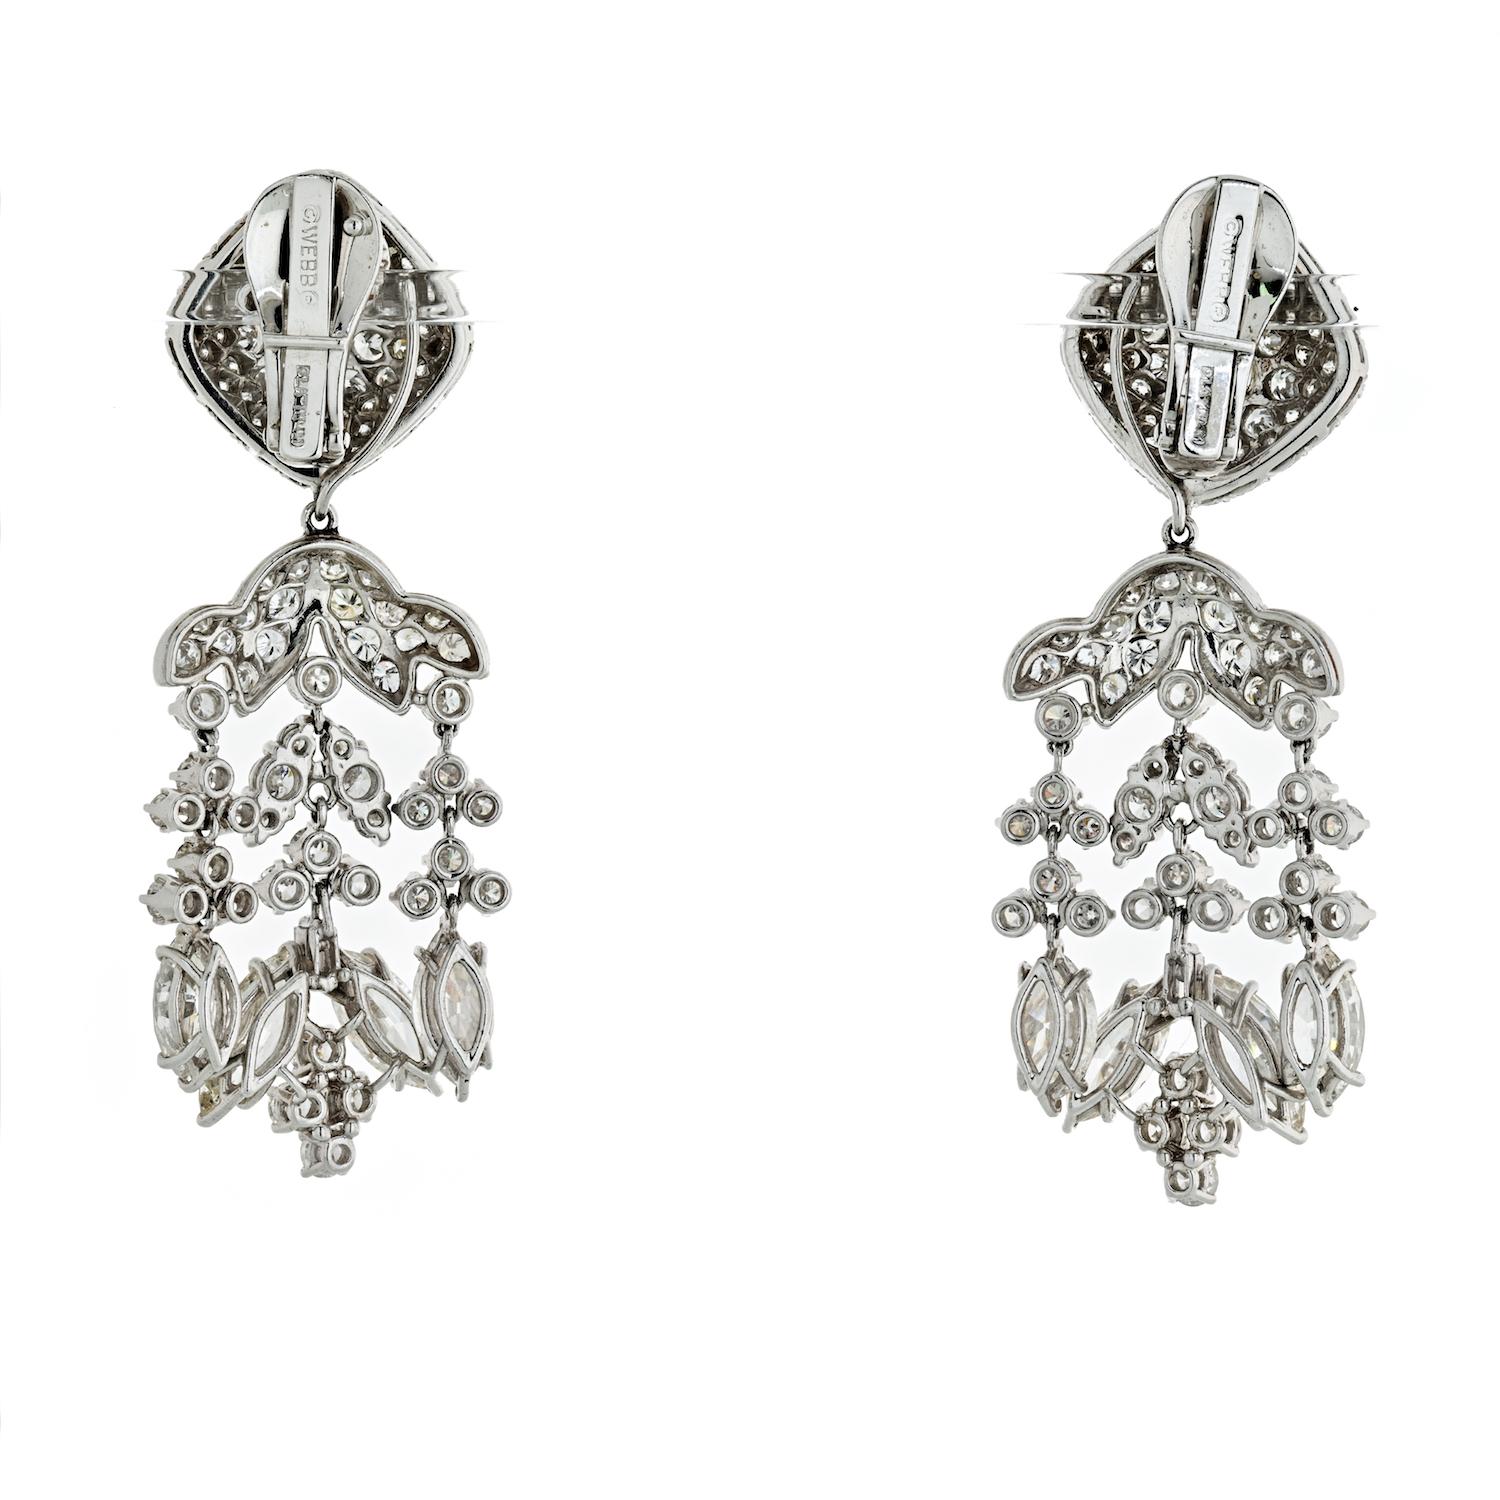 A pair of American 20th Century platinum chandelier earrings with over 20 carat of diamonds by David Webb. The articulated earrings have marquise, round and a touch of baguette cut diamonds with an approximate total weight of 20.17 carats, G/H